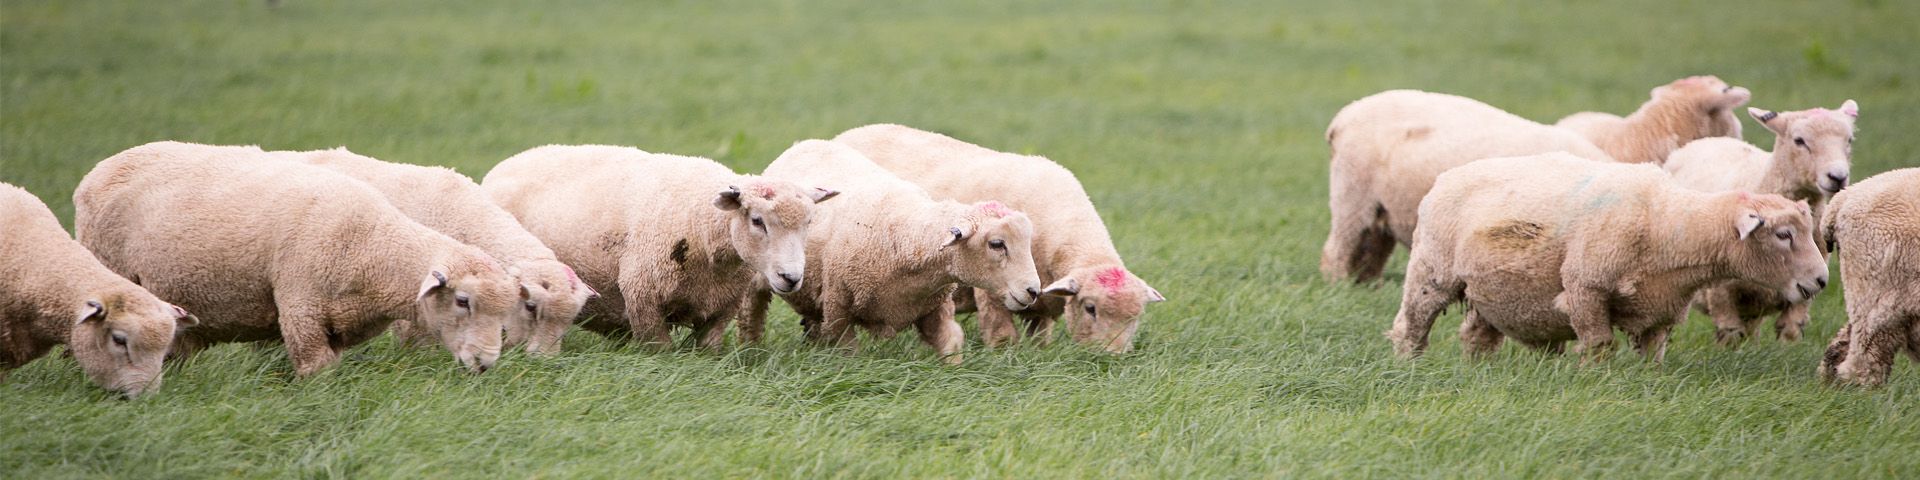 Sheep grazing on healthy pasture